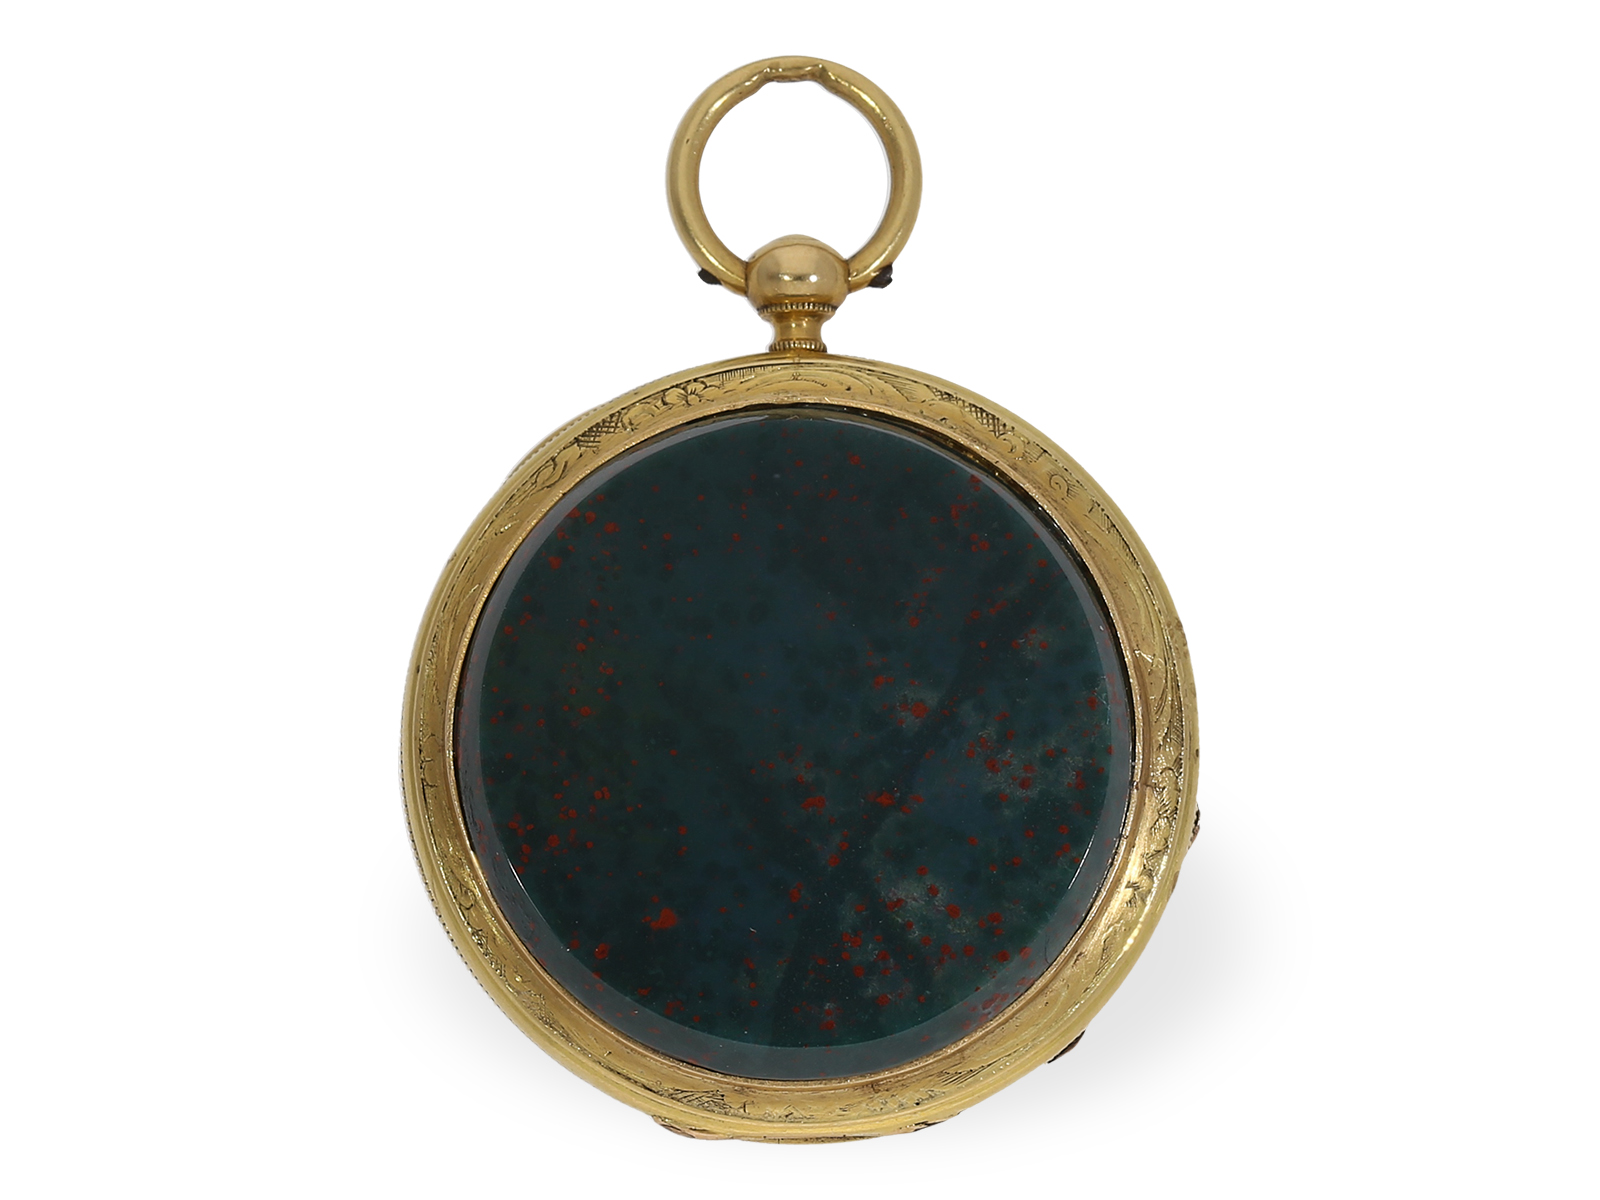 Pocket watch: rare lepine with gold/jasper case and gold/jasper chatelaine, ca. 1850 - Image 4 of 8